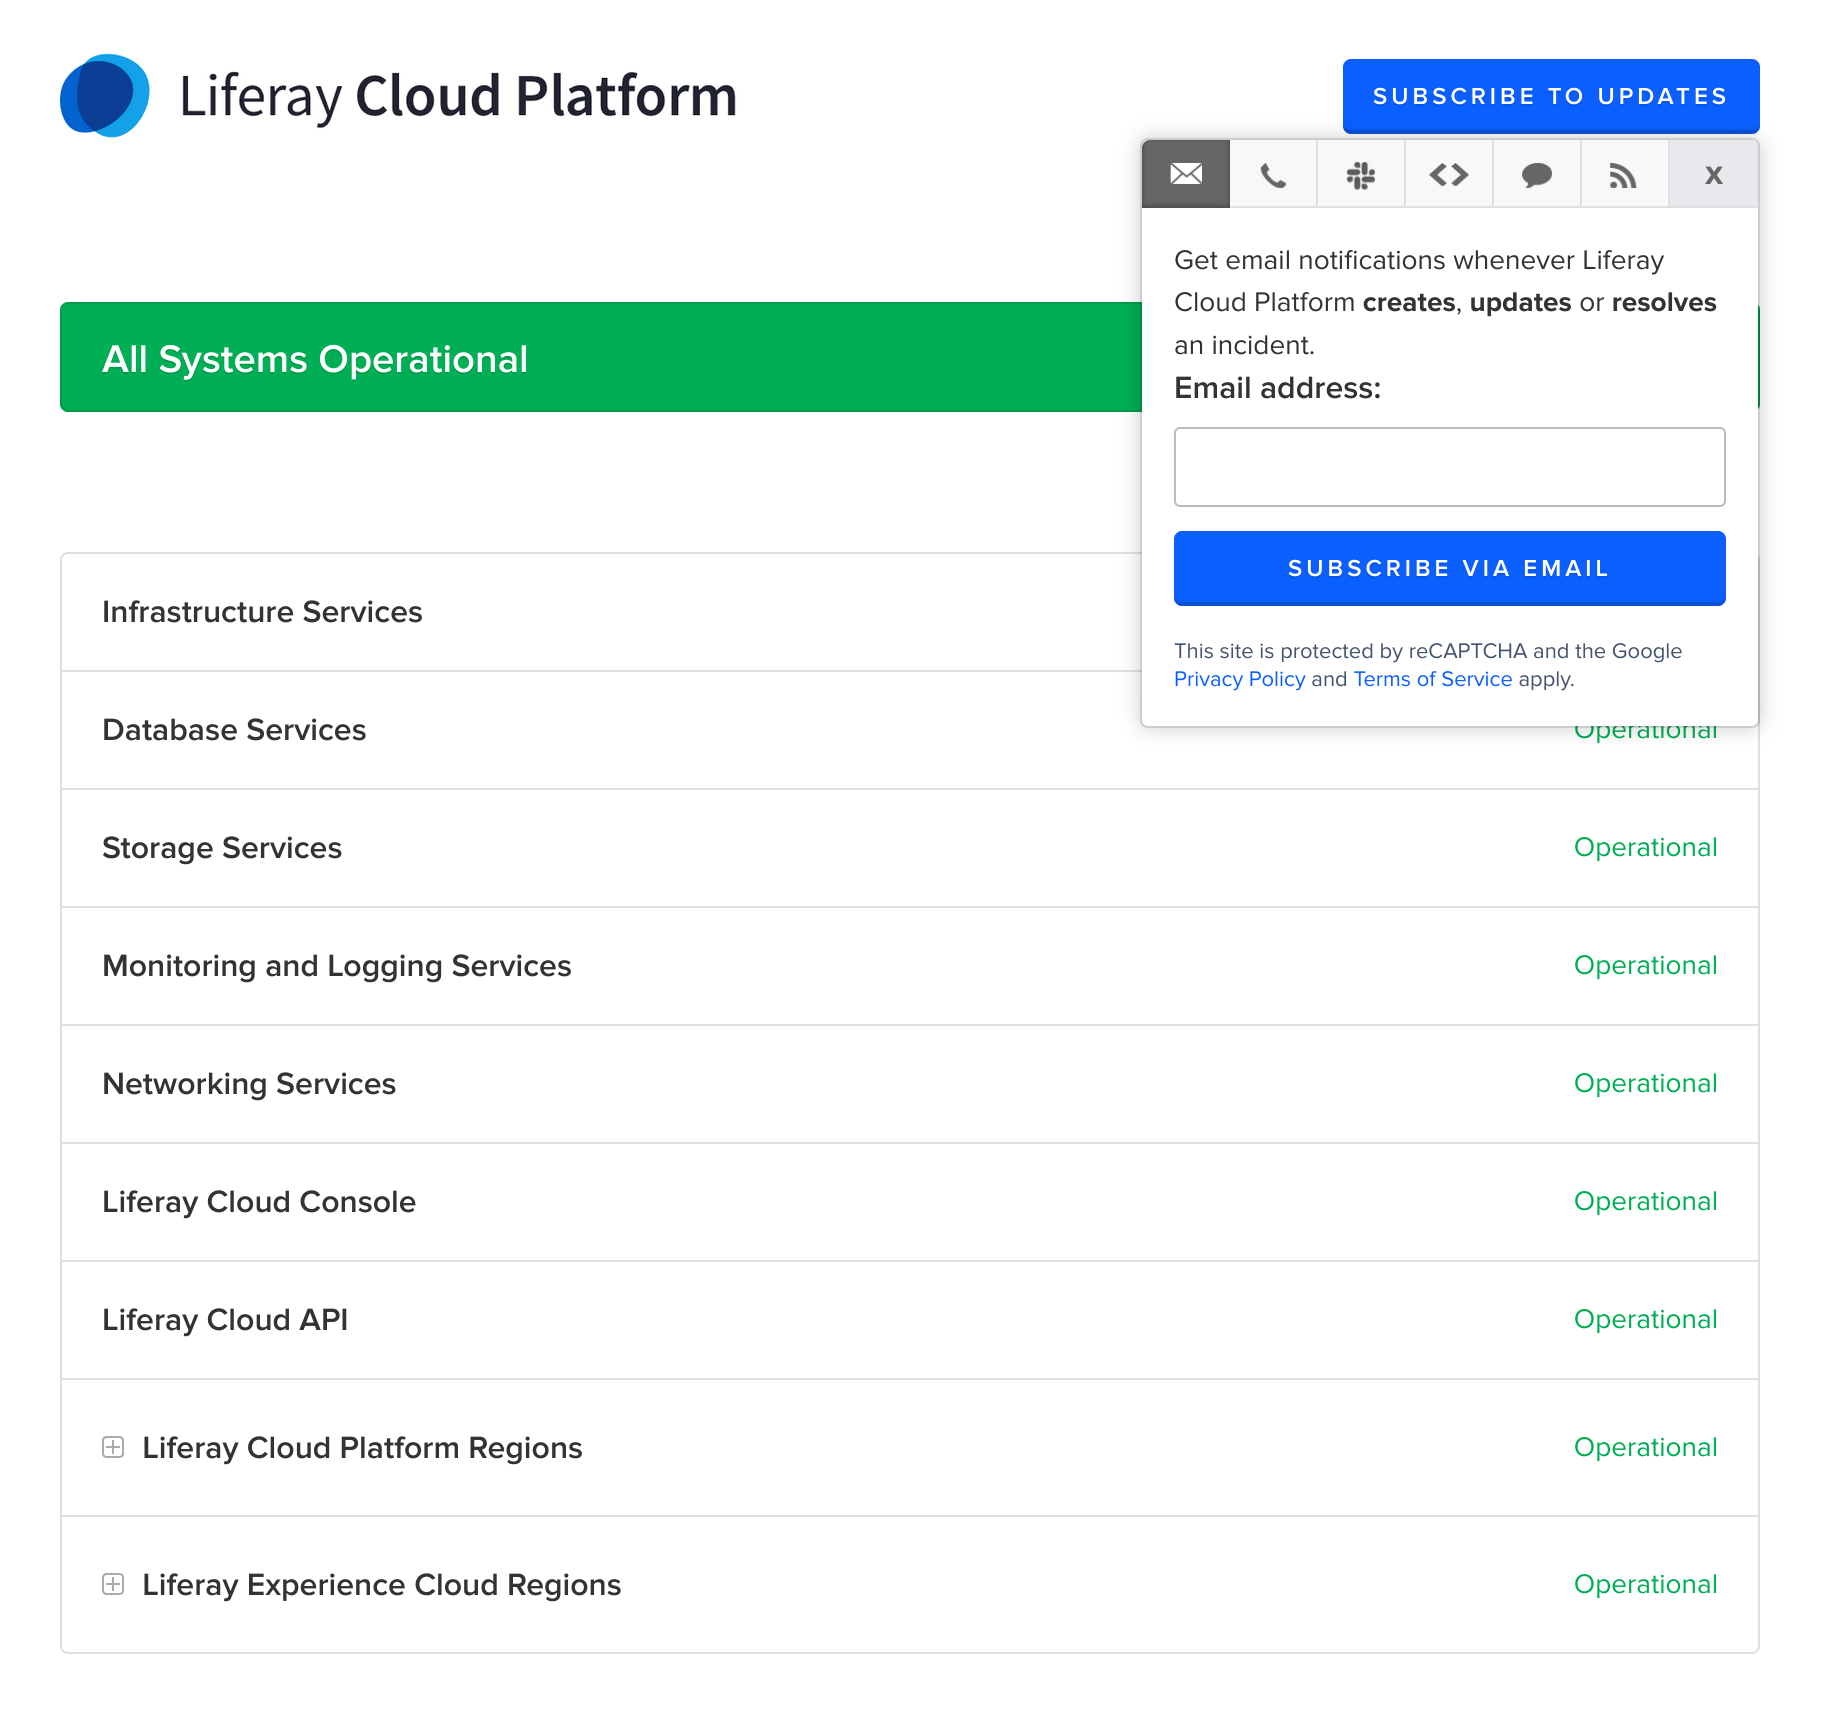 Subscribe to status.liferay.cloud to get quick updates on any service outages or ongoing maintenance.